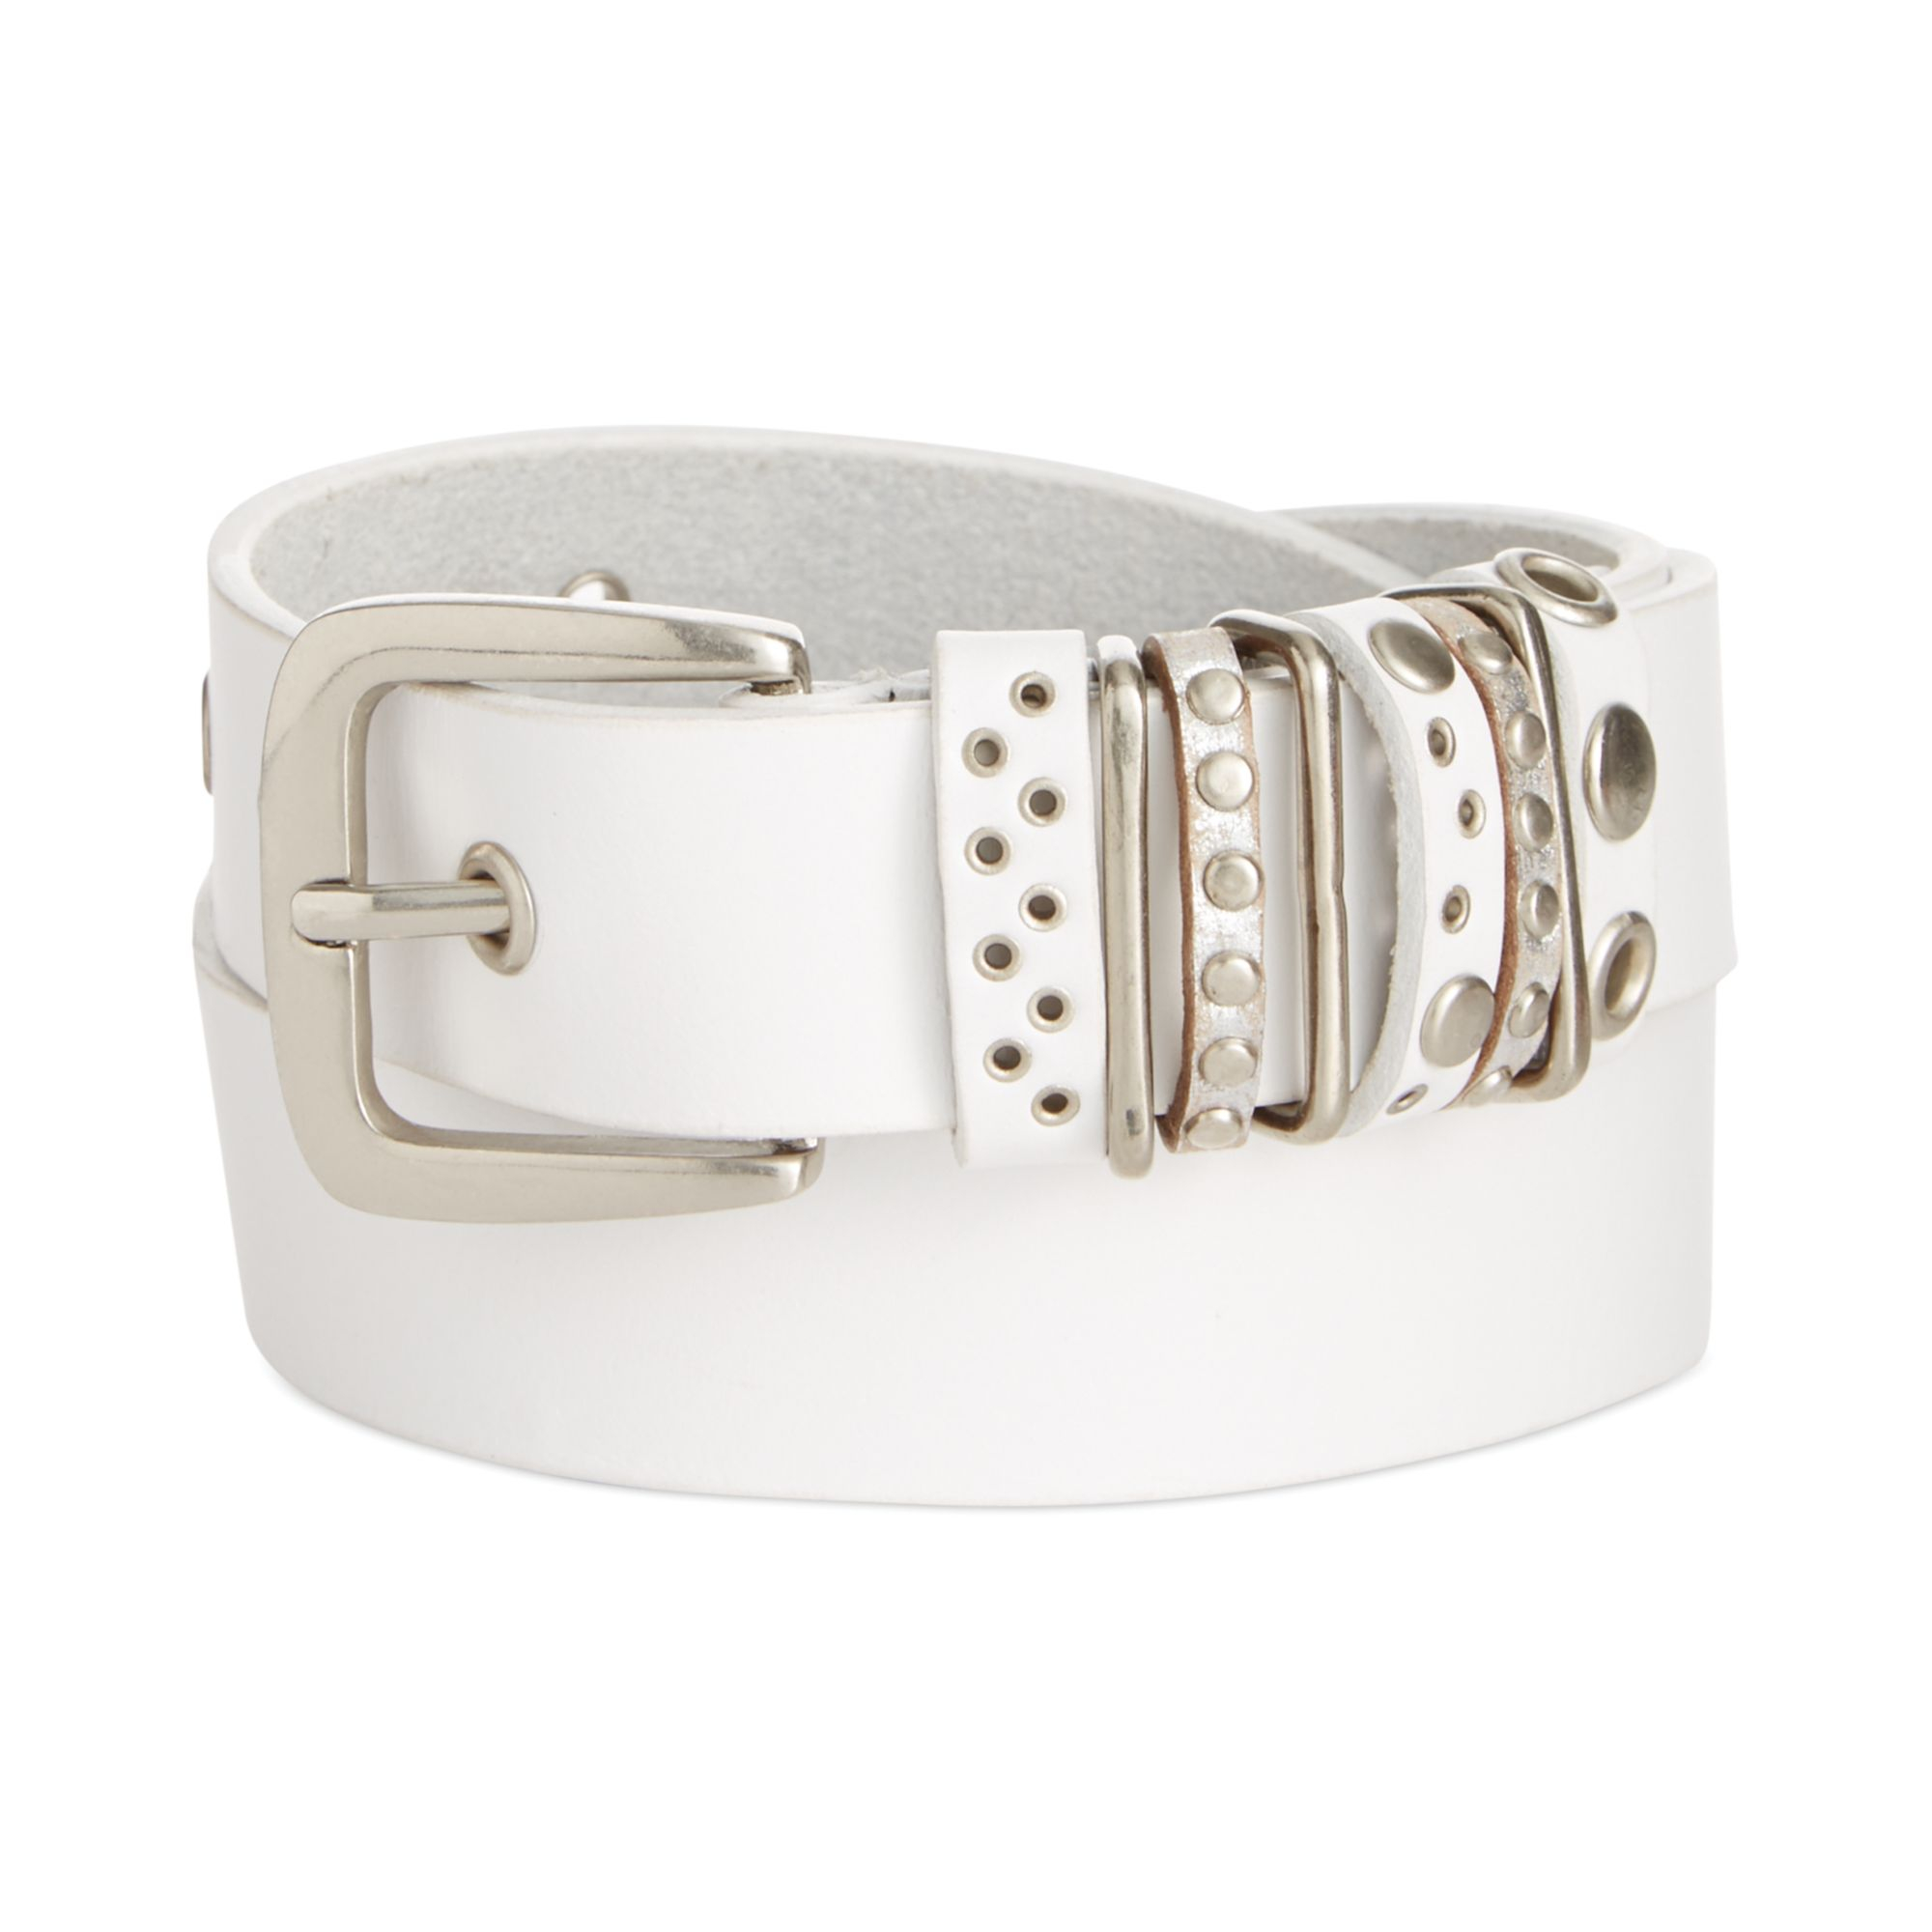 Calvin klein Studded Loops Pant Belt in White (White/Tumbled Nickel) | Lyst